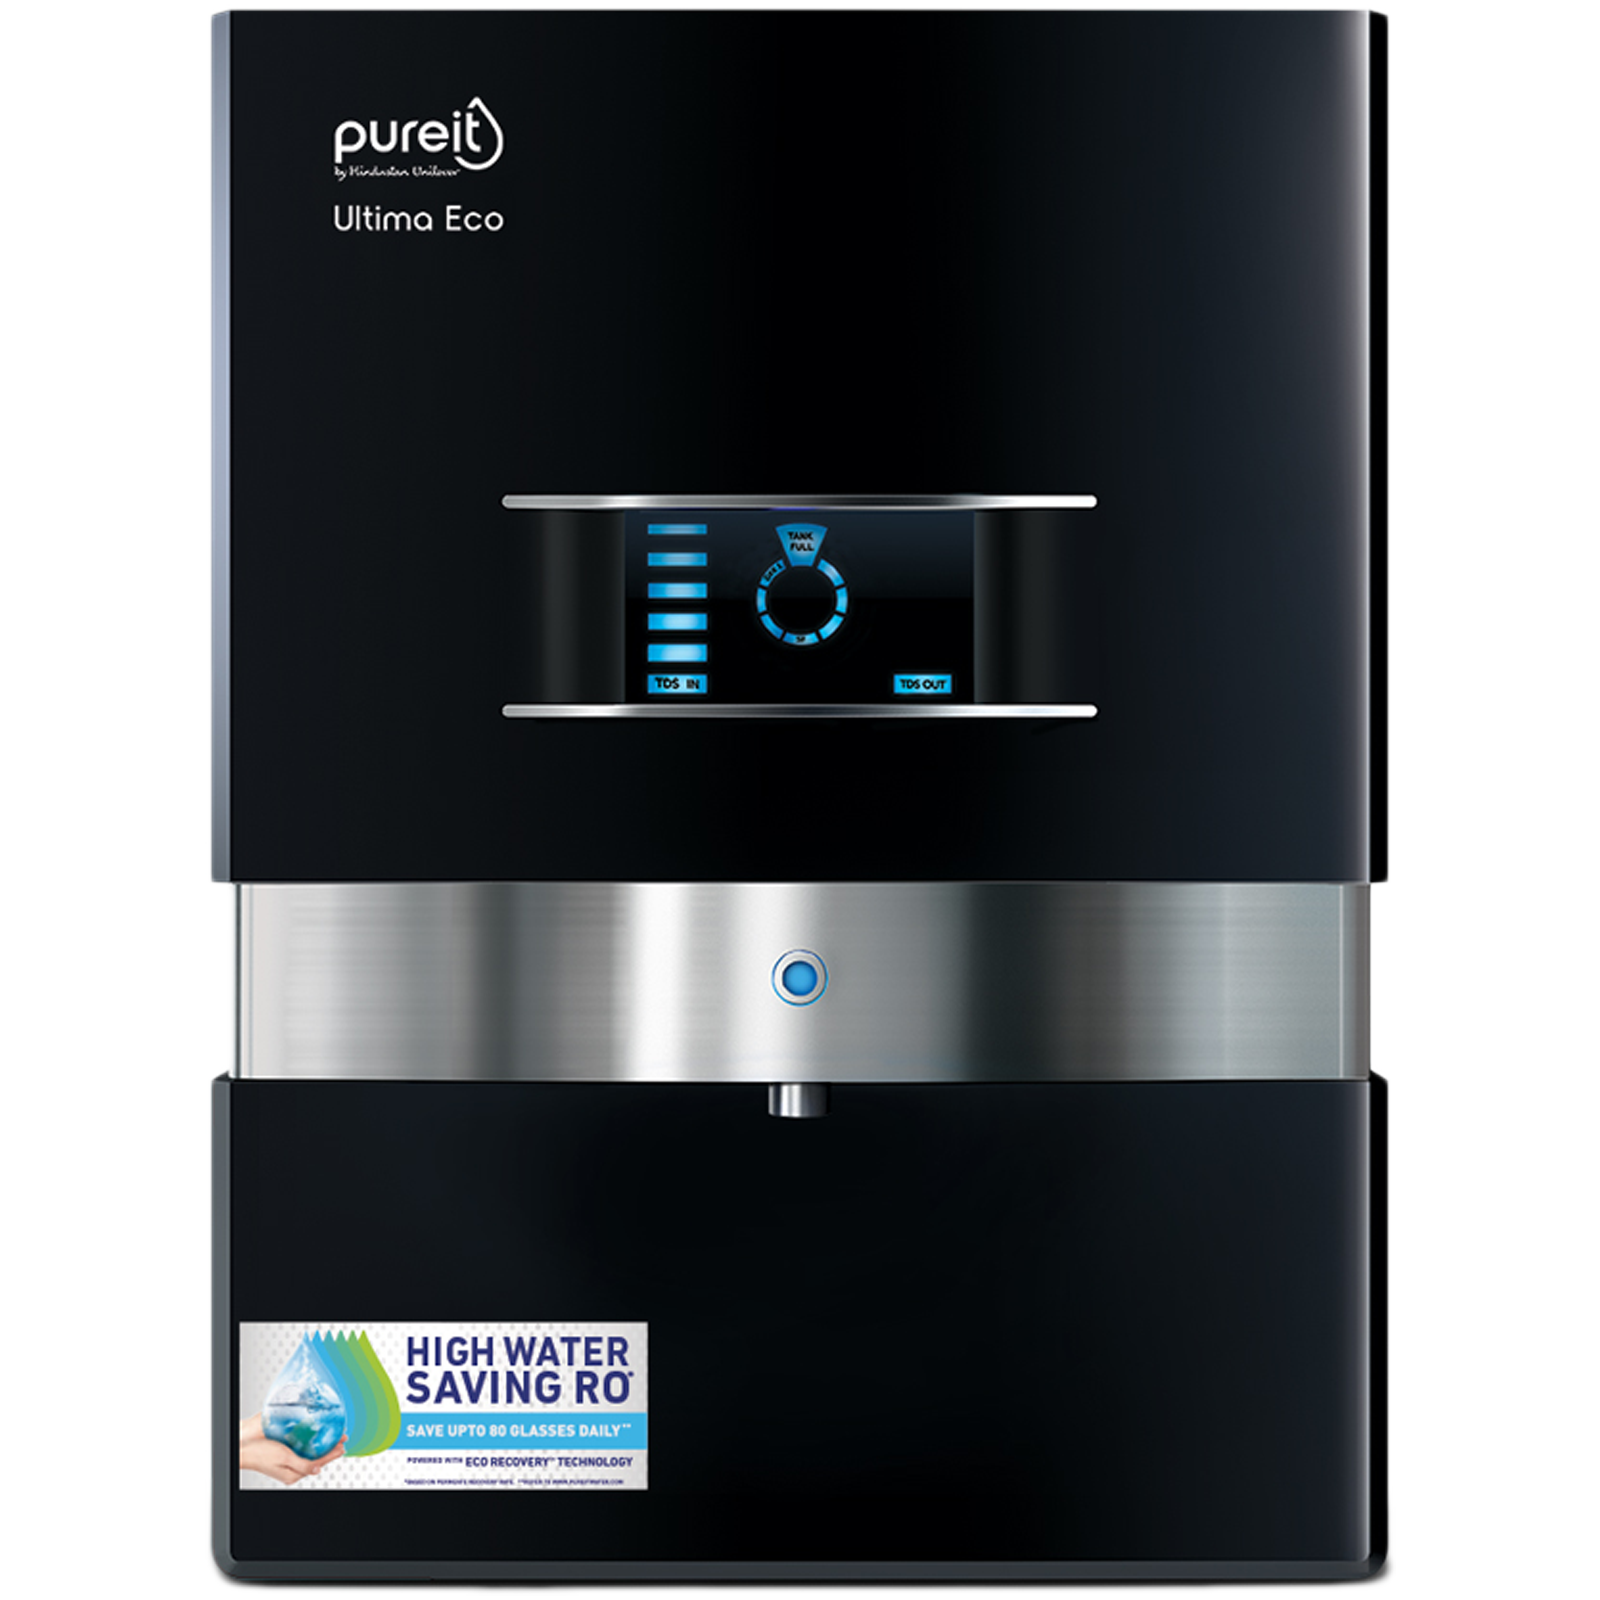 Pureit Ultima Eco Mineral RO+UV+MF Electrical Water Purifier (7 Stage Filtration, WDRJ400, Black)_1